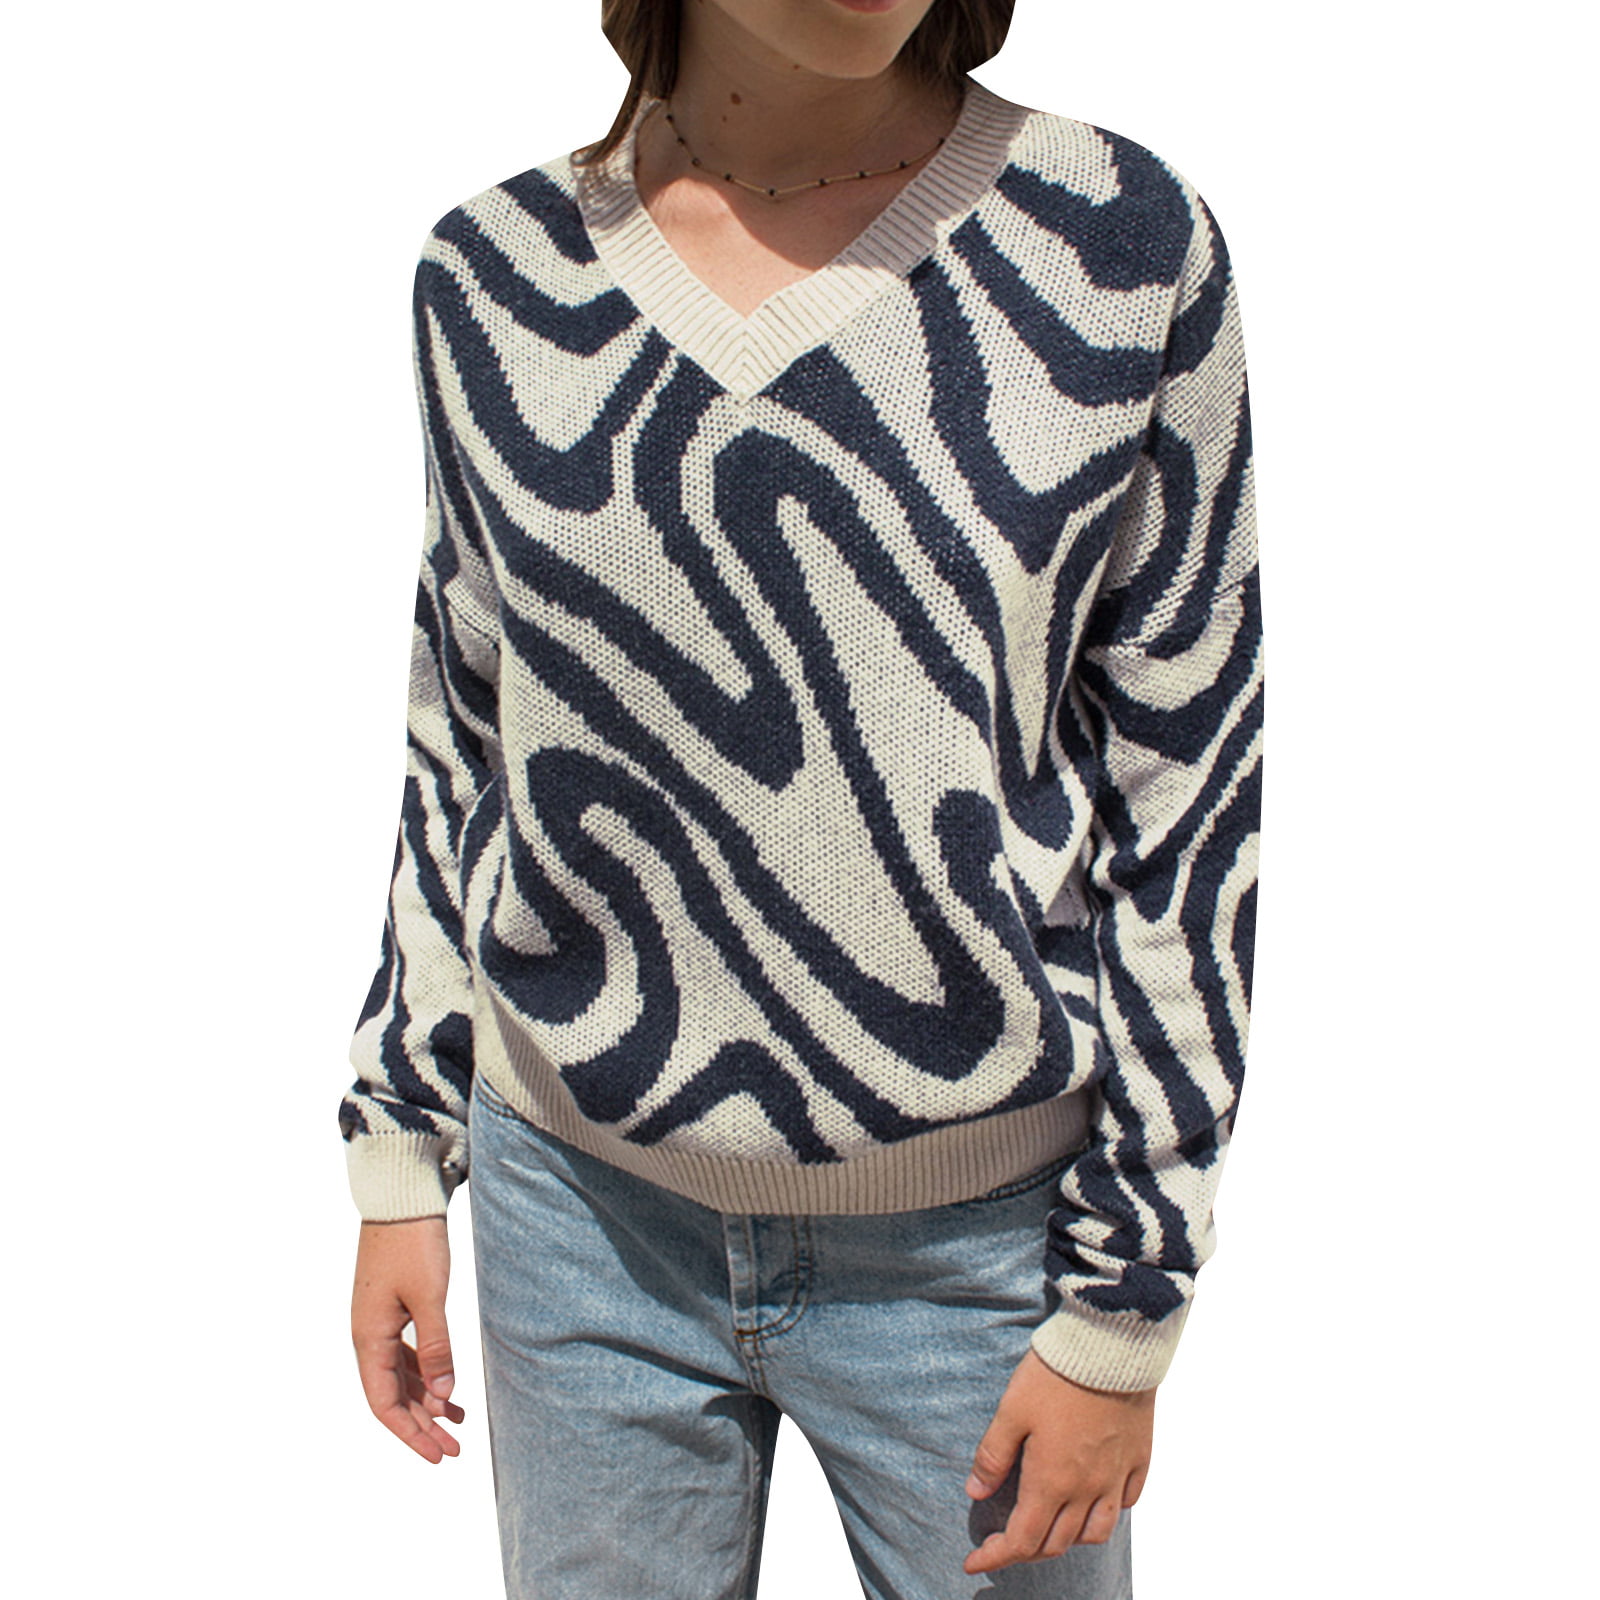 BRNEBN Womens Knit Knitted Top Contrast Womens V-Neck Knitted Top Thin Knit Pullover Blue 